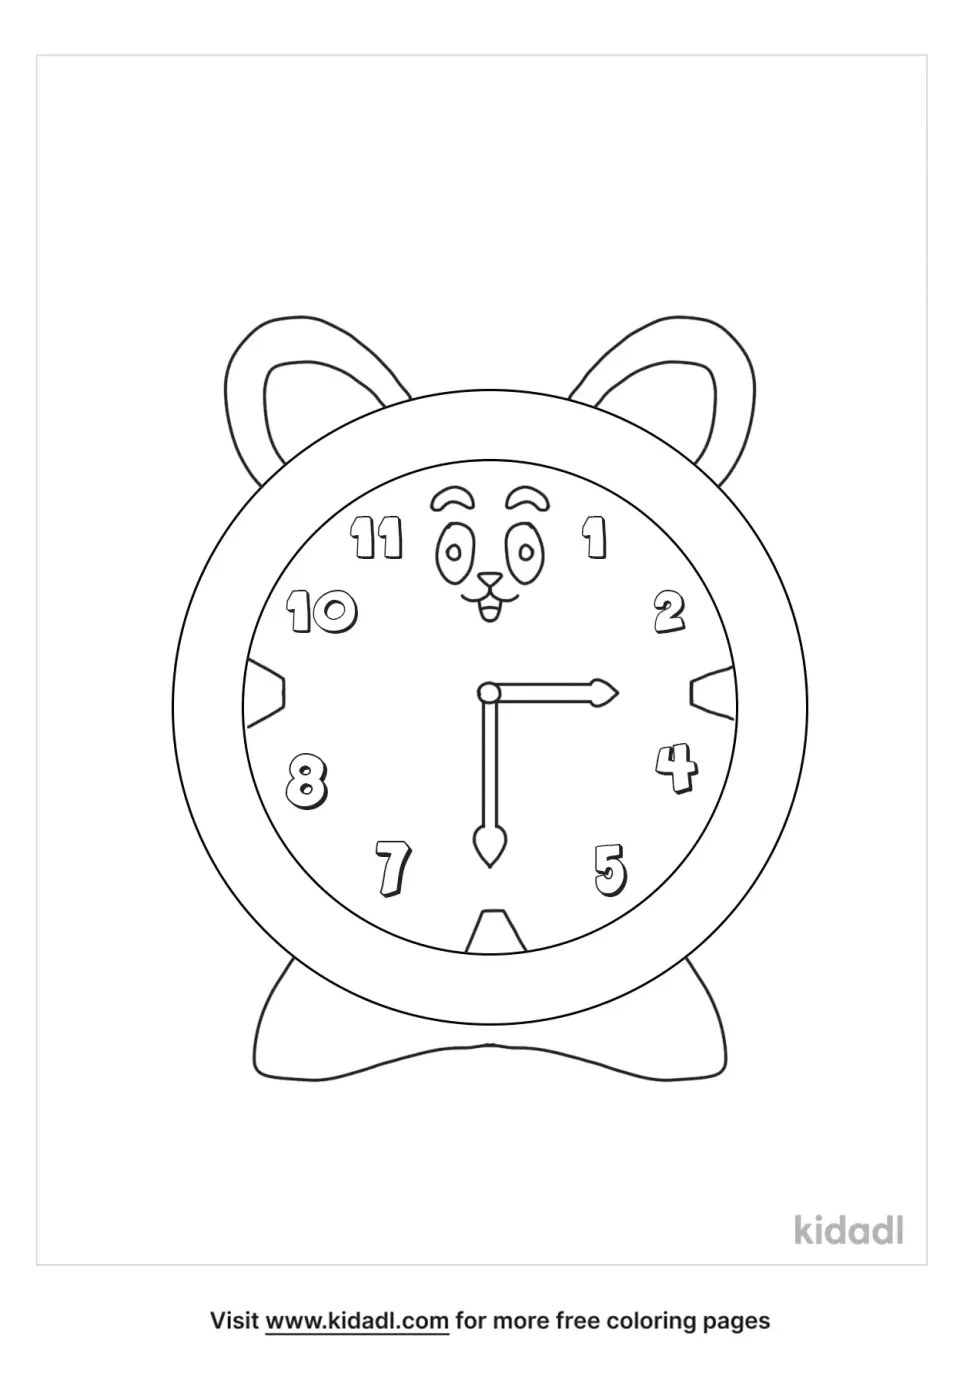 Daylight Saving Time Coloring Page